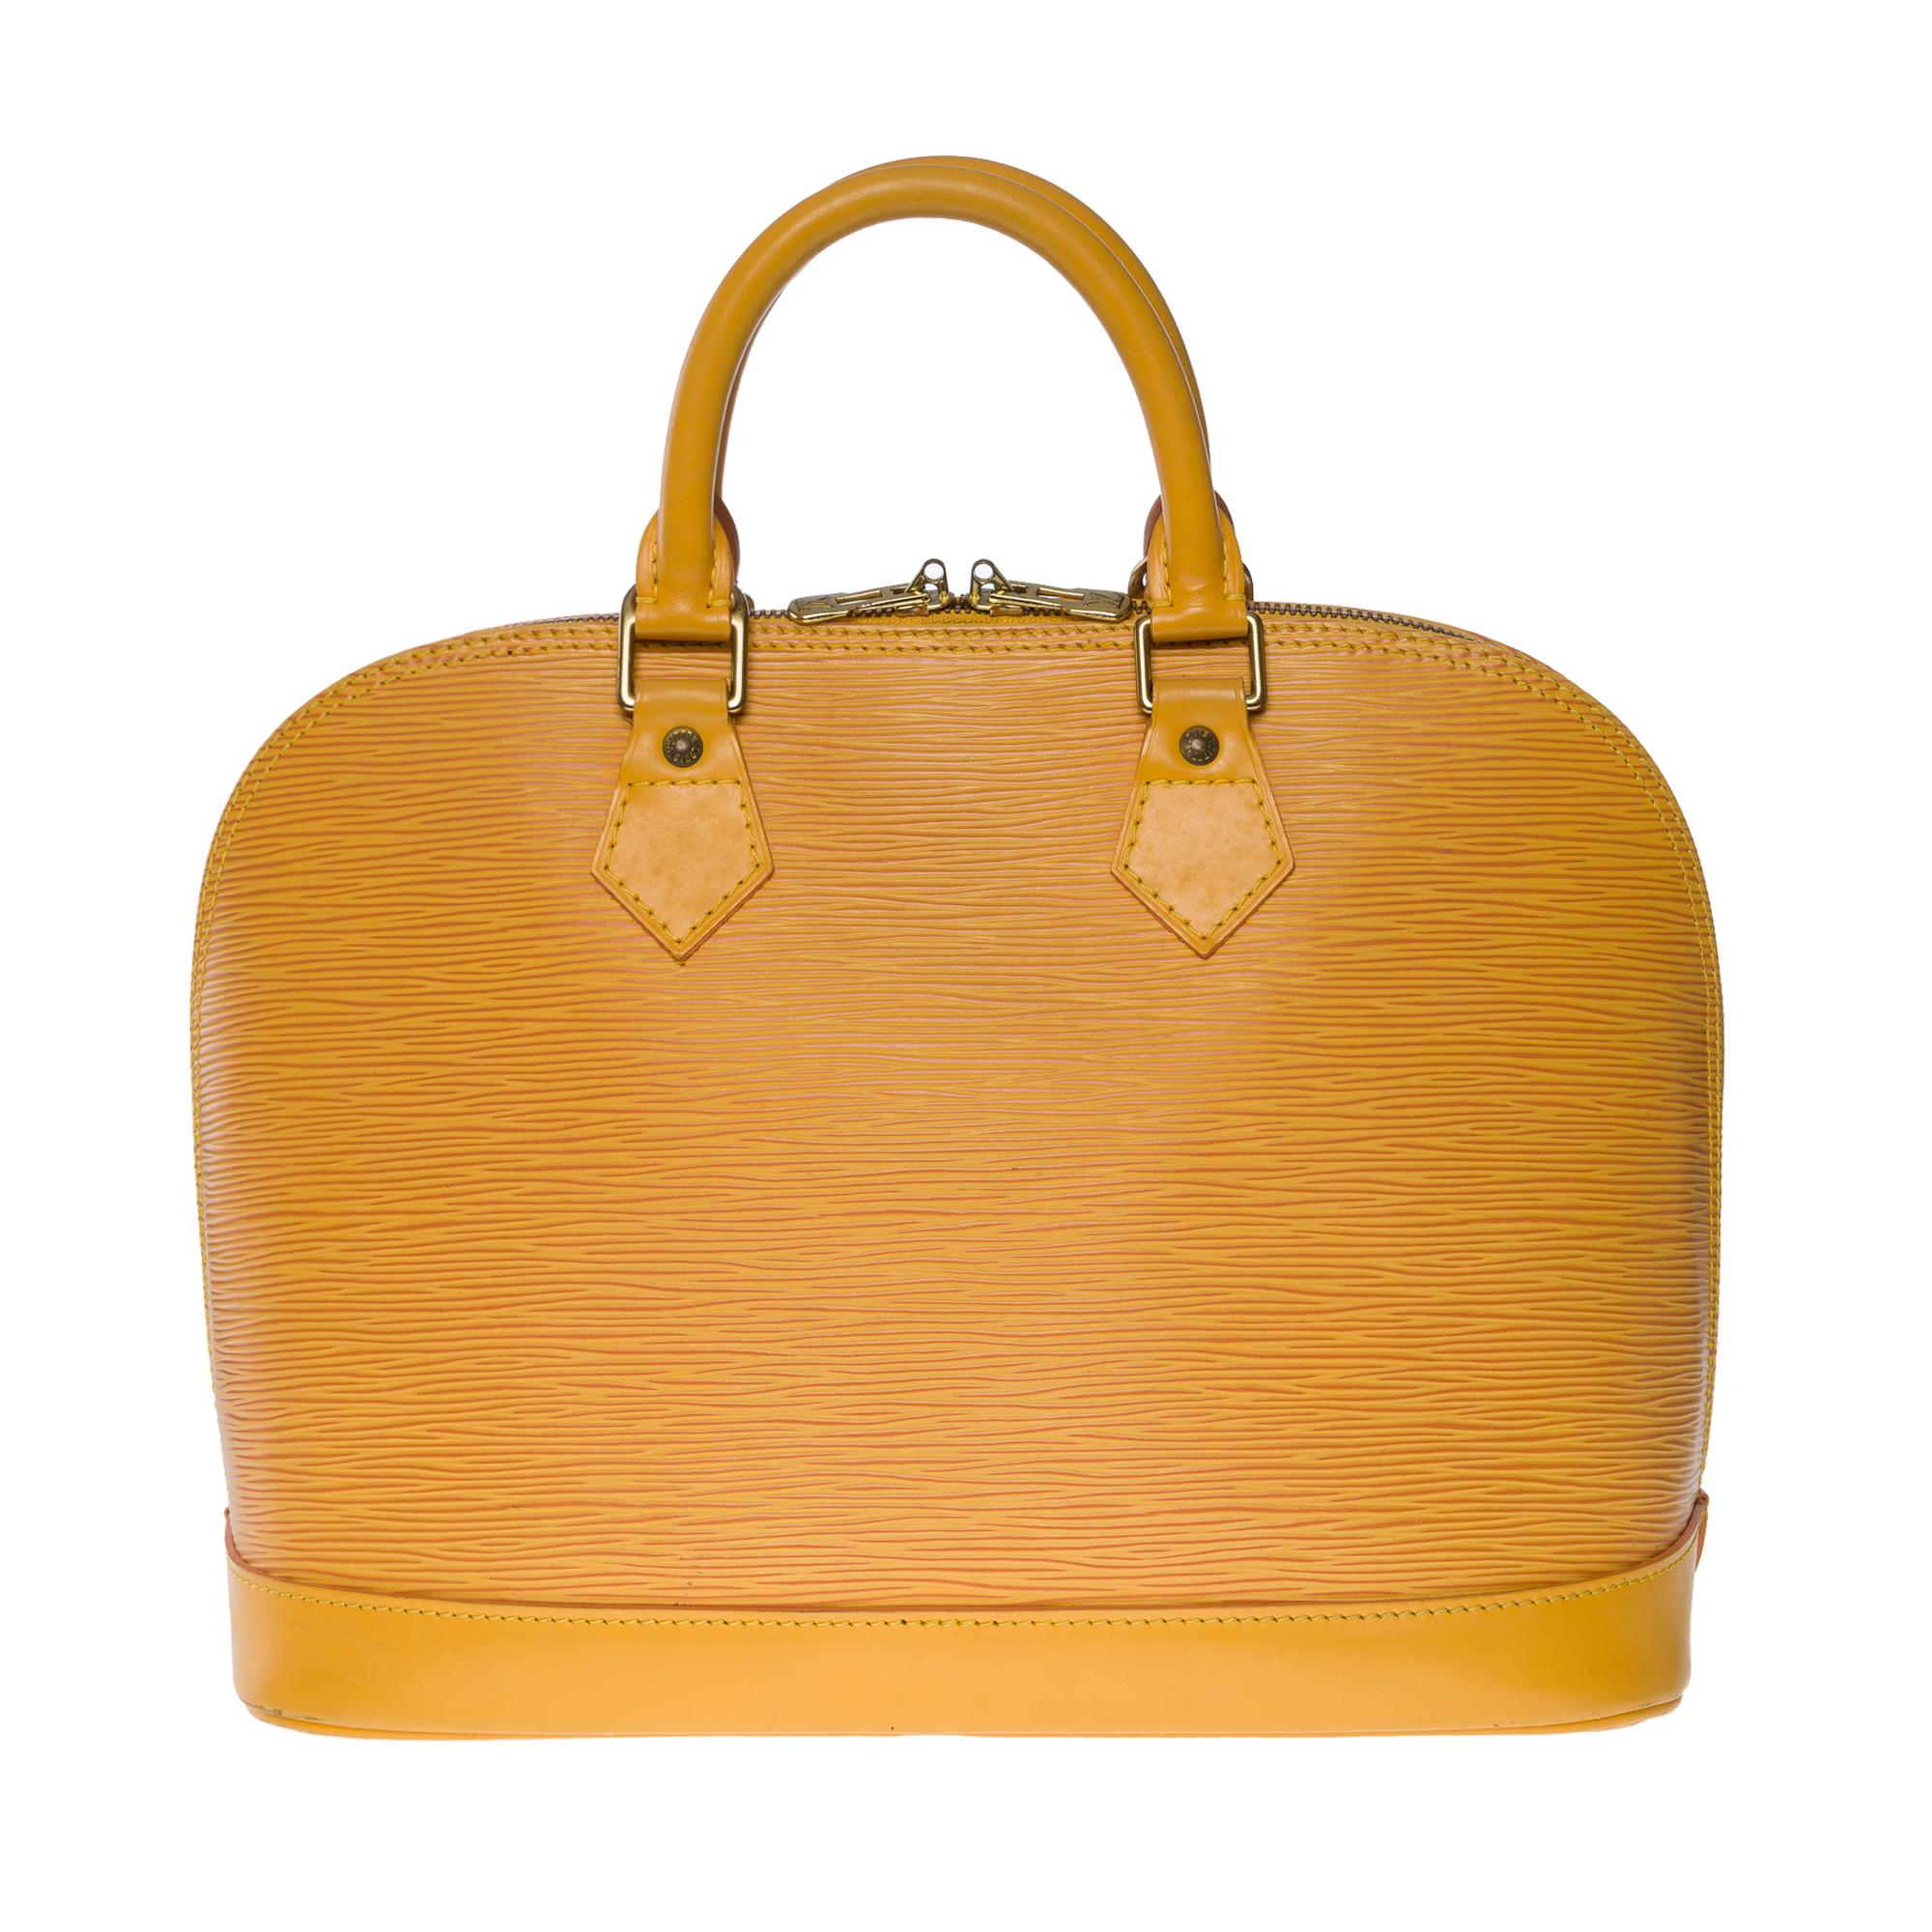 Louis Vuitton Alma handbag in Yellow epi leather with gold hardware In Good Condition For Sale In Paris, IDF